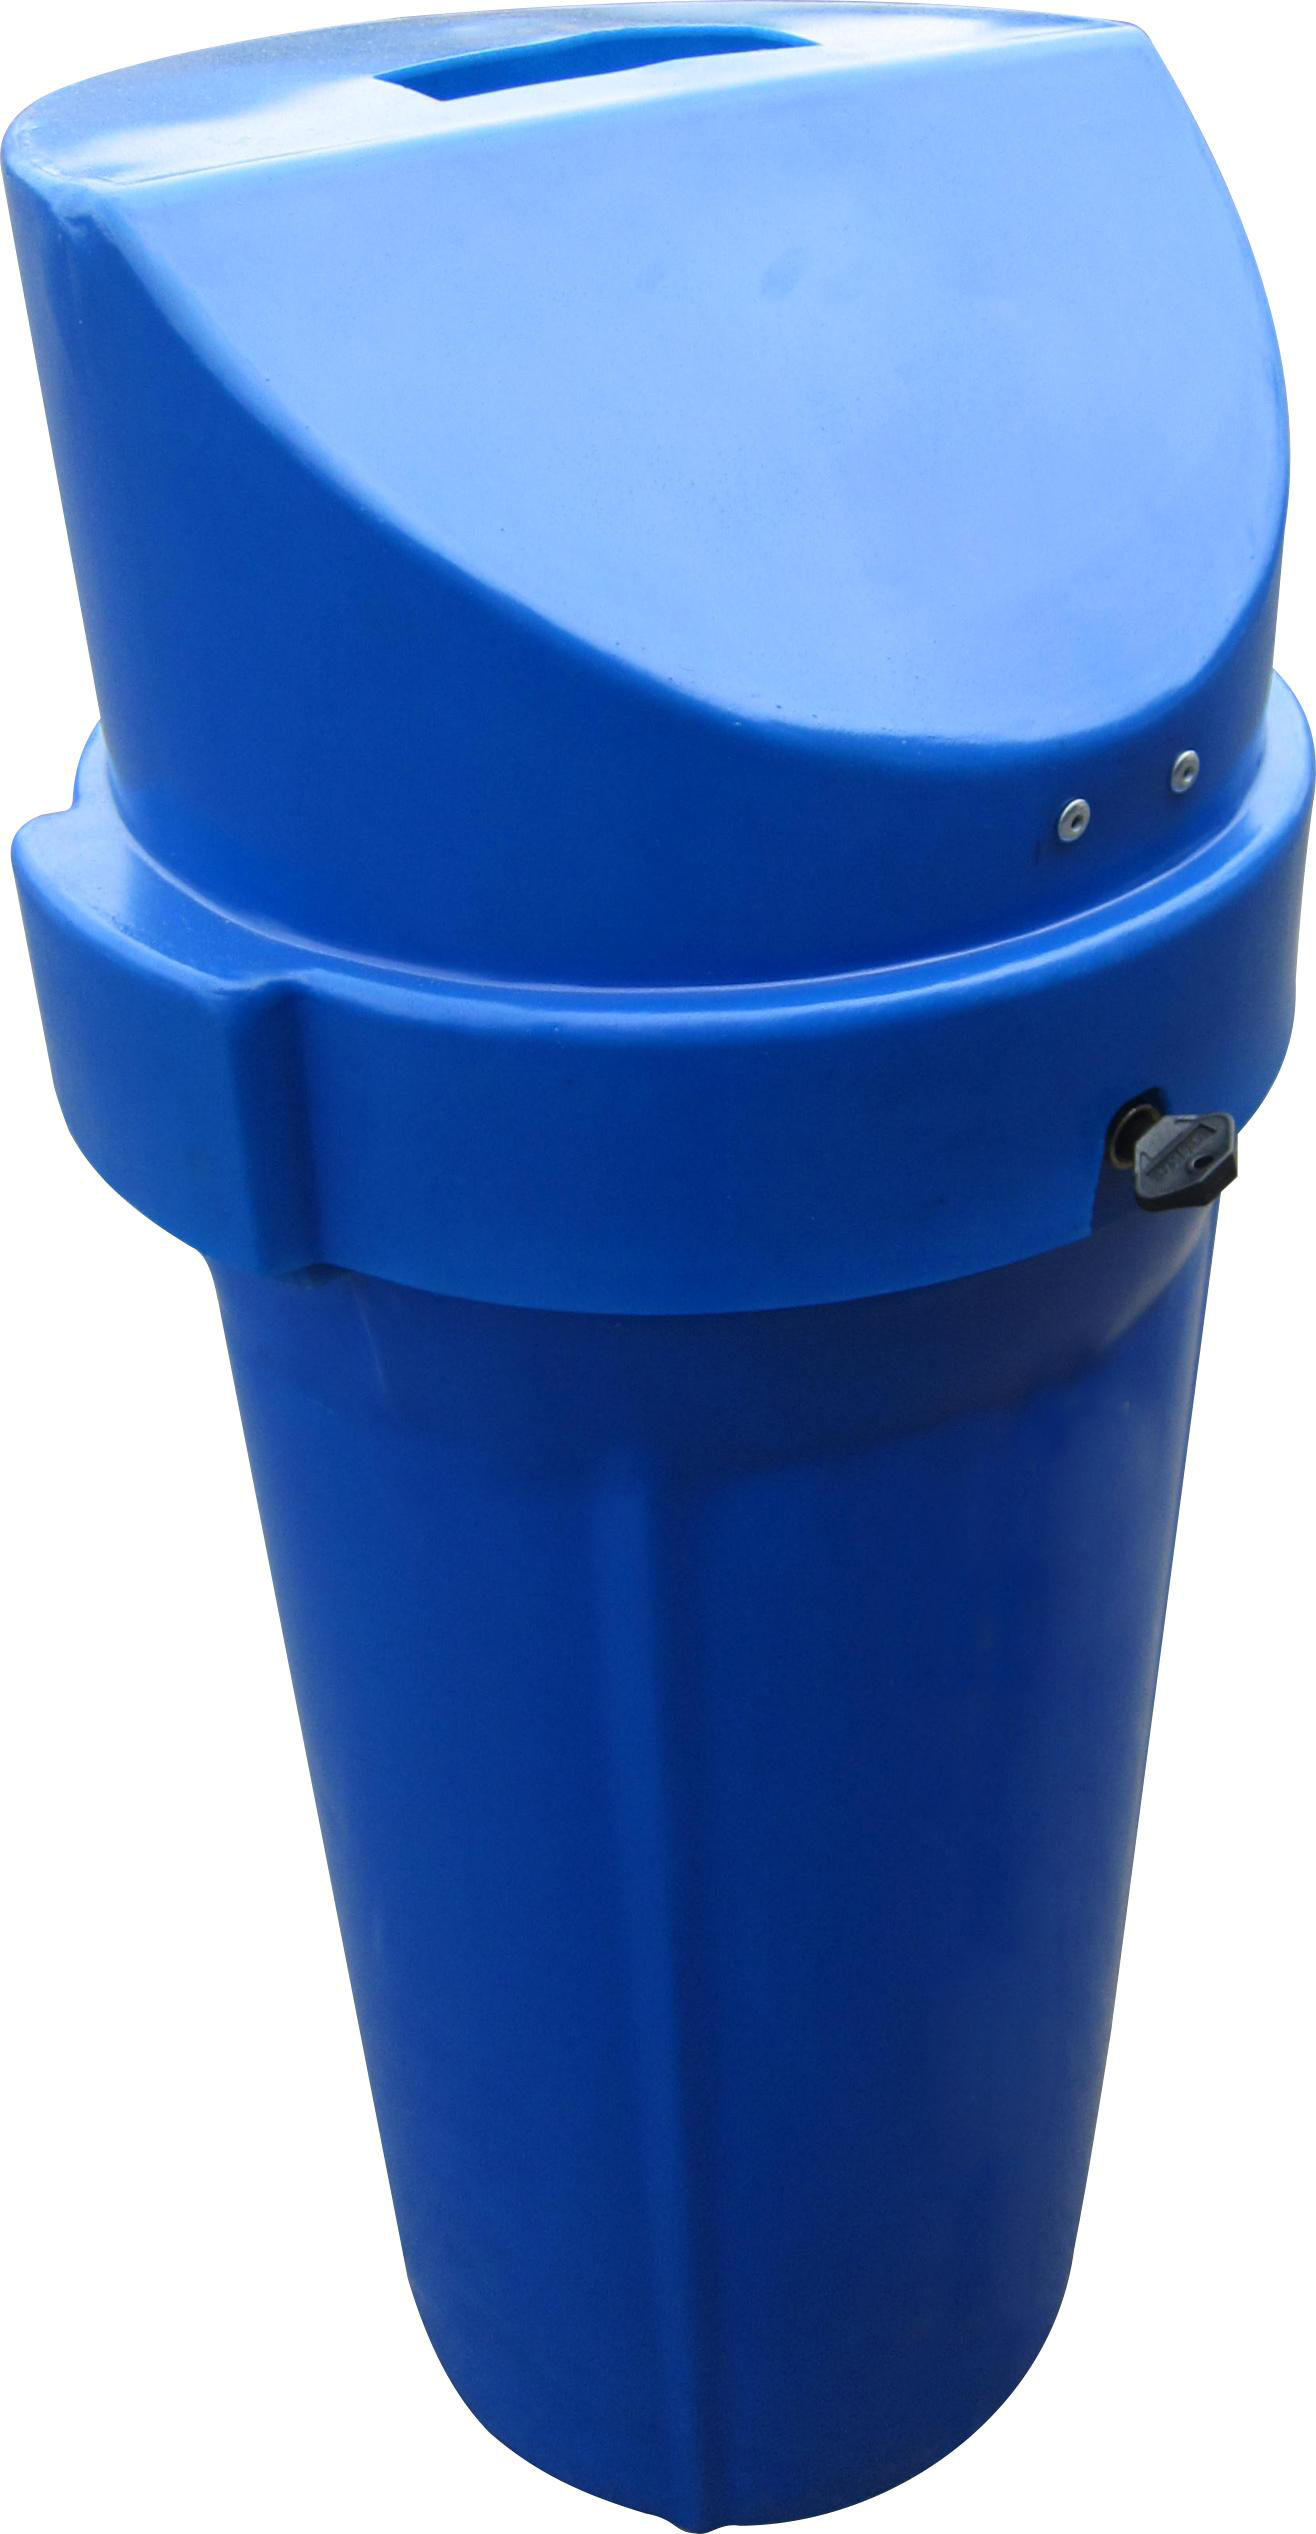 Sturdy Secure Recycling Container - Model A